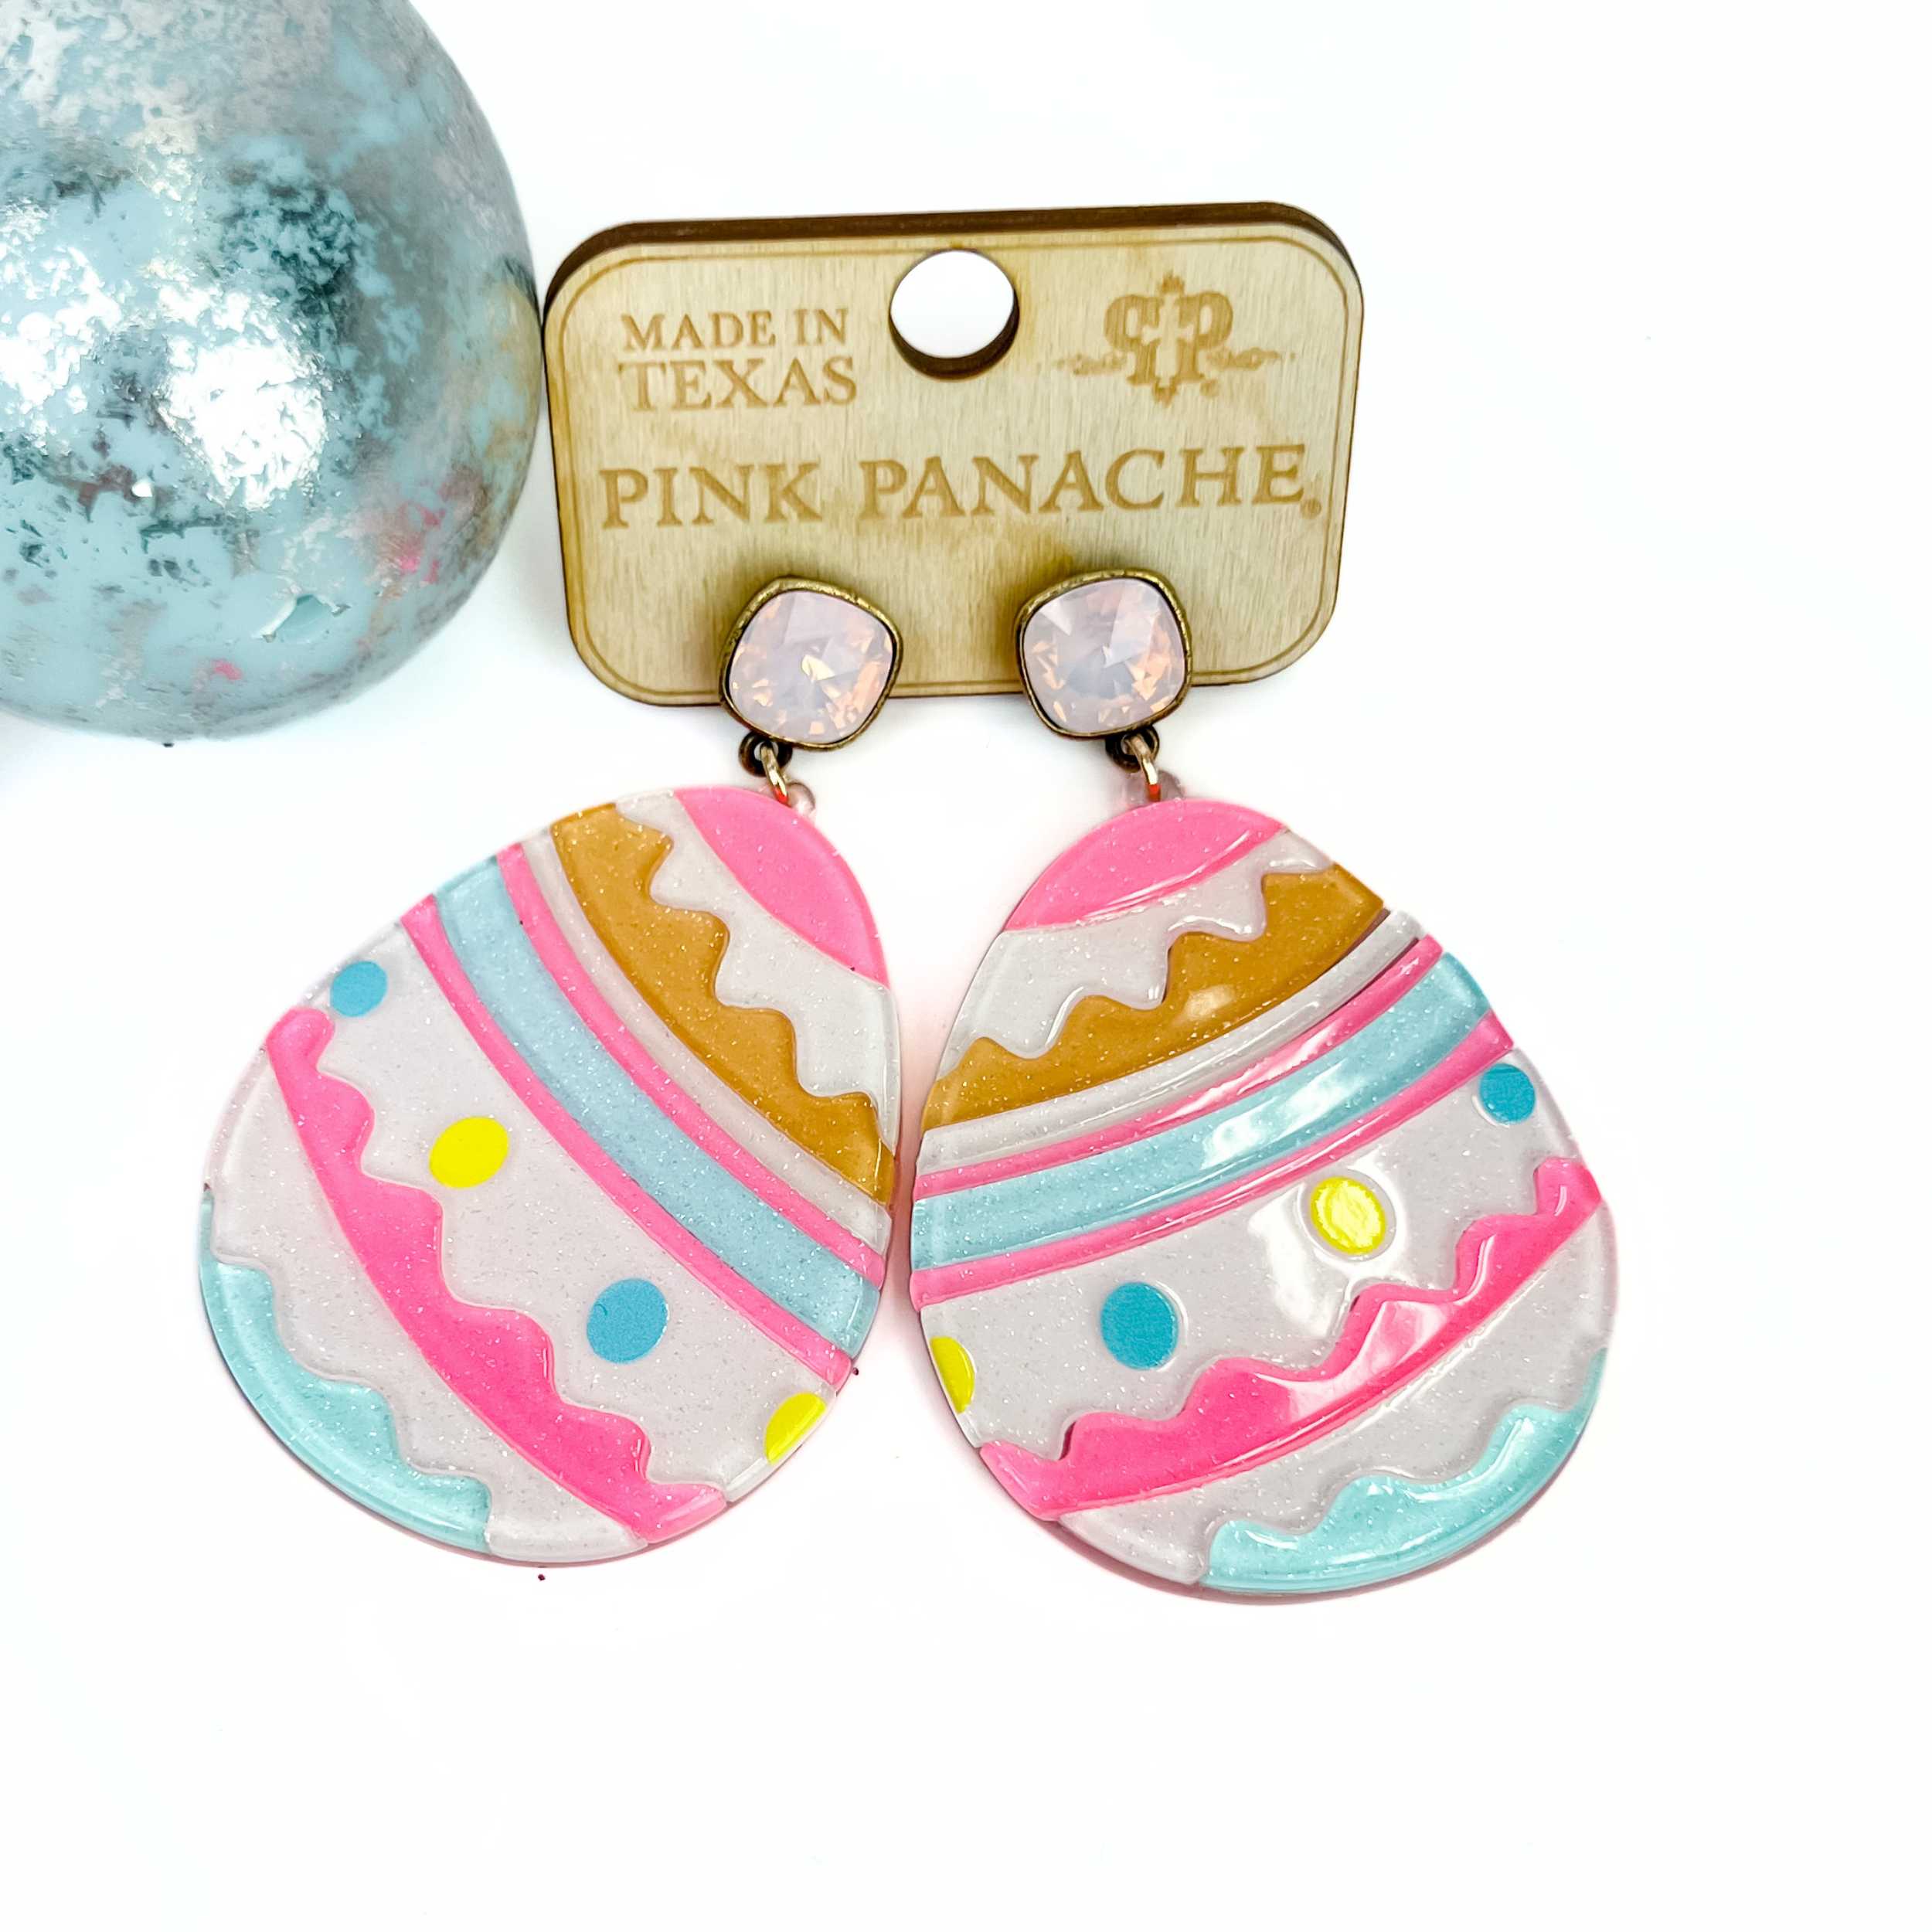 Ivory glitter acrylic easter eggs with swirly lines in pink, orange, and blue to give the appearance of an easter egg as well as neon yellow and blue dots accent the oval shaped earrings.  Attached at the top is a pink cushion cut sworvoski crystal.  Earrings are placed on a wooden earring tag that says made in Texas, Pink Panache and shows the PP logo.  Earrings have an accent of an Easter egg in the top left corner.  Earrings and egg are placed on a white background.